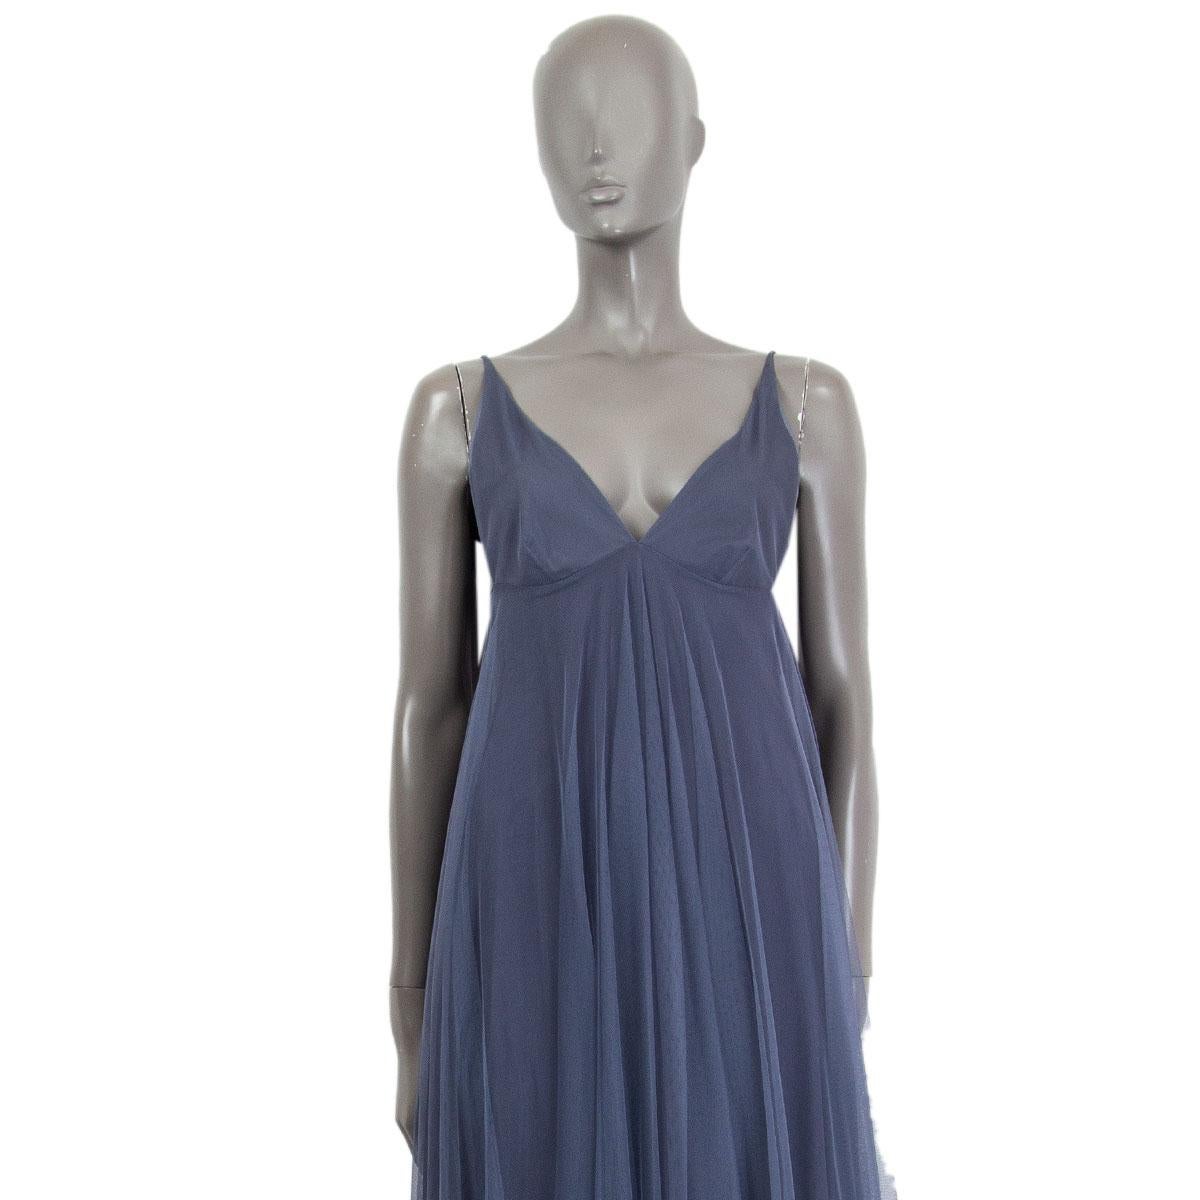 Gucci flared empire maxi dress in pigeon blue silk (75%) and nylon (25%) with a v-neck and is sleeveless. Closes on the side a concealed zipper. Lined in pigeon blue silk blend (assumed as not specified on content tag). Has been worn and is in